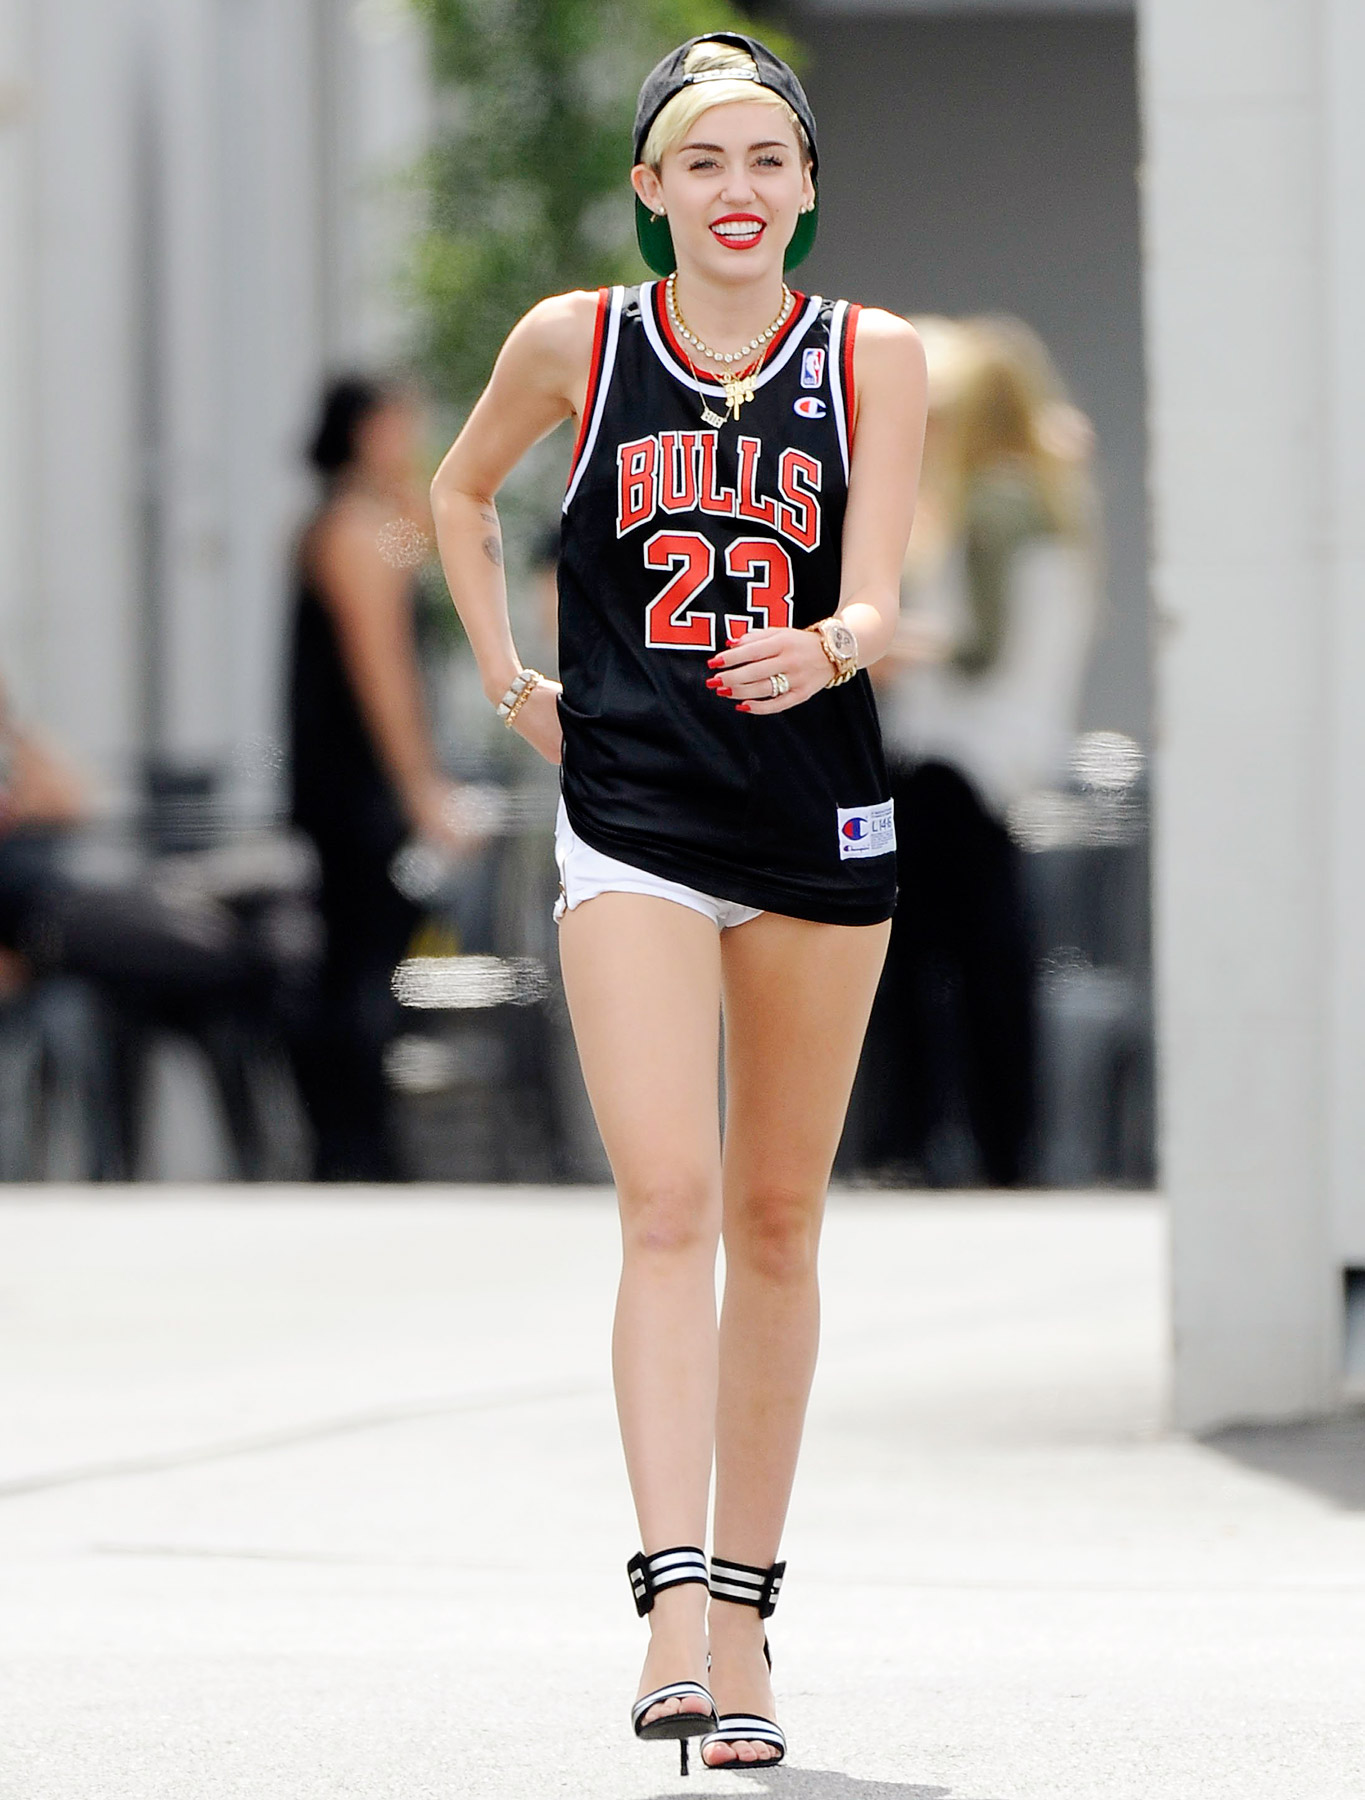 Miley Cyrus Sexy Outfit: Singer Wears Jersey, Short Shorts, High Heels